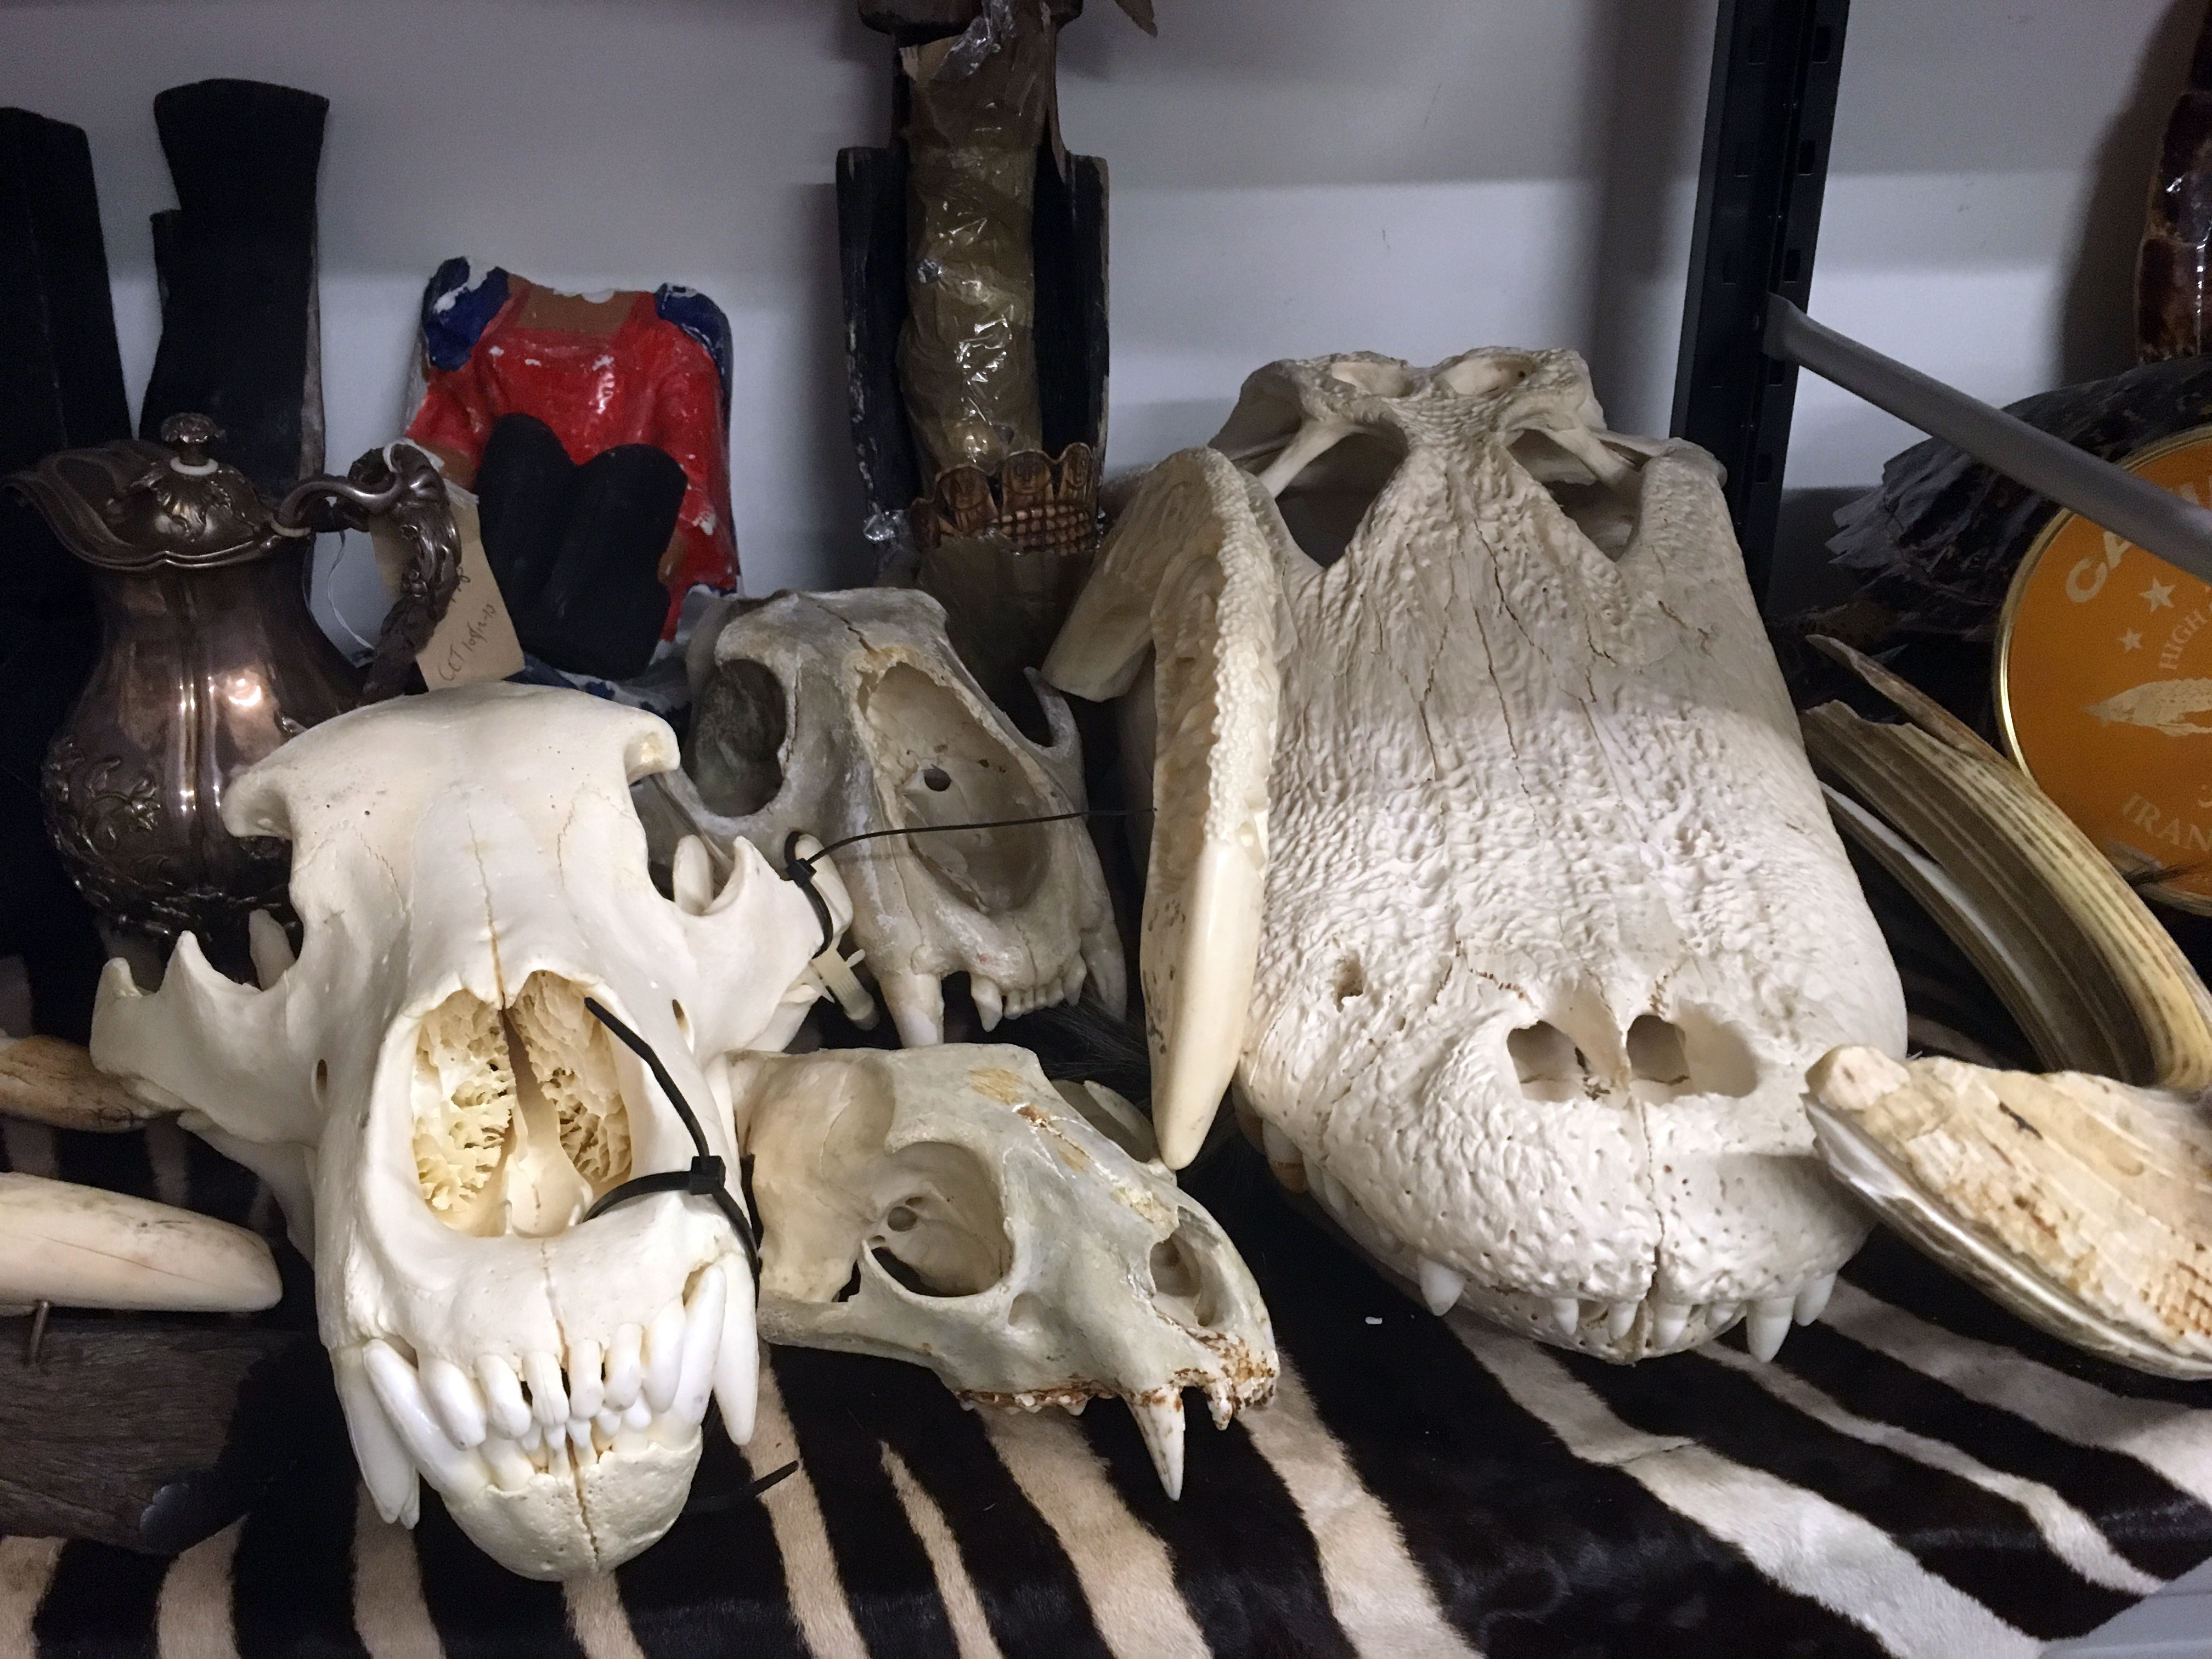 Reptile skins and skulls apprehended at Heathrow.